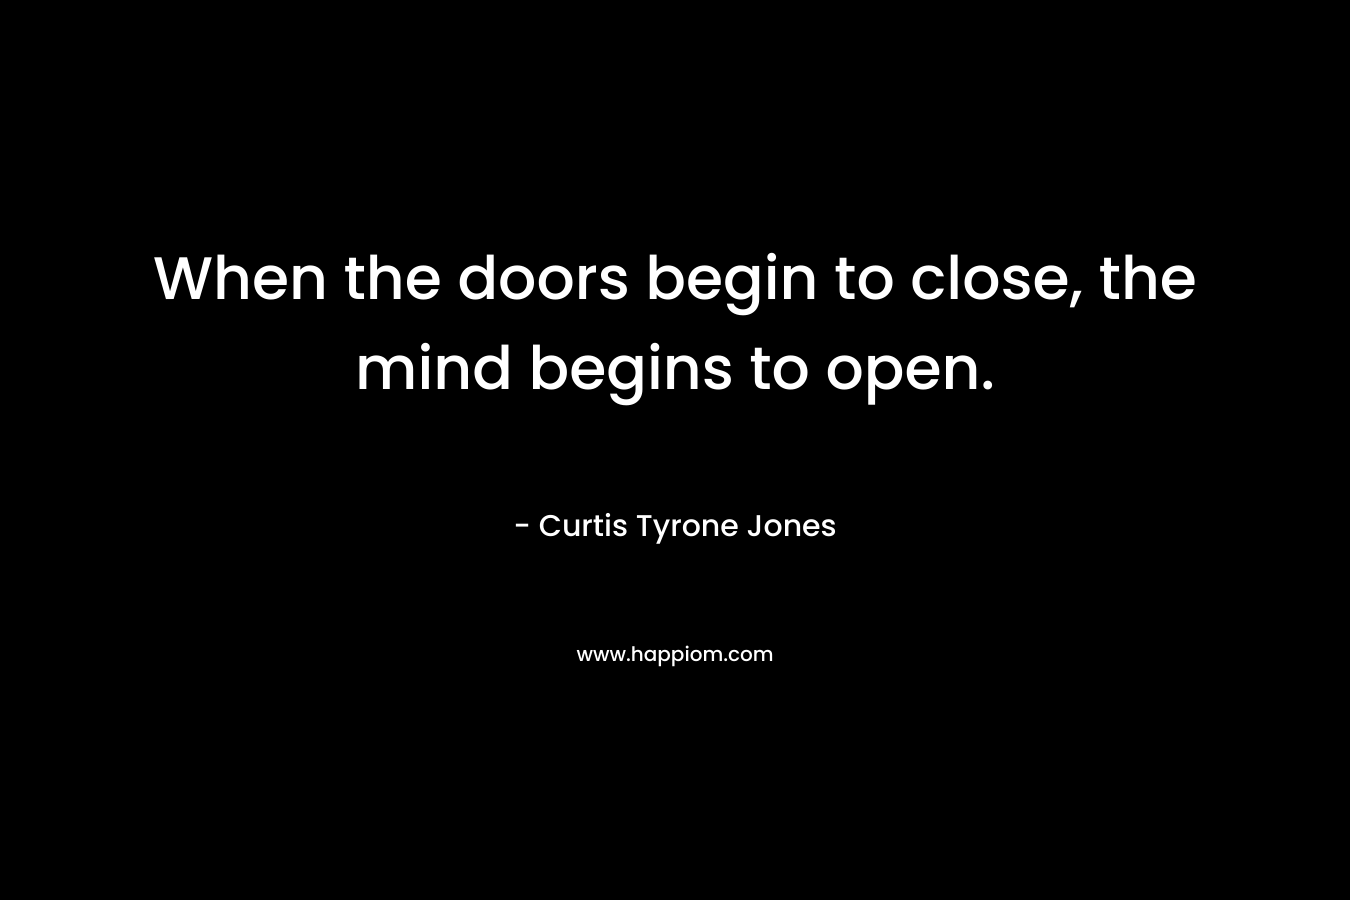 When the doors begin to close, the mind begins to open.